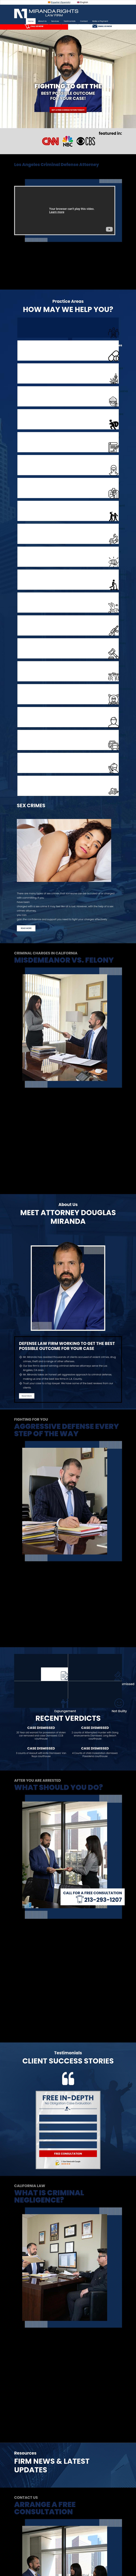 Miranda Rights Law Firm - Los Angeles CA Lawyers